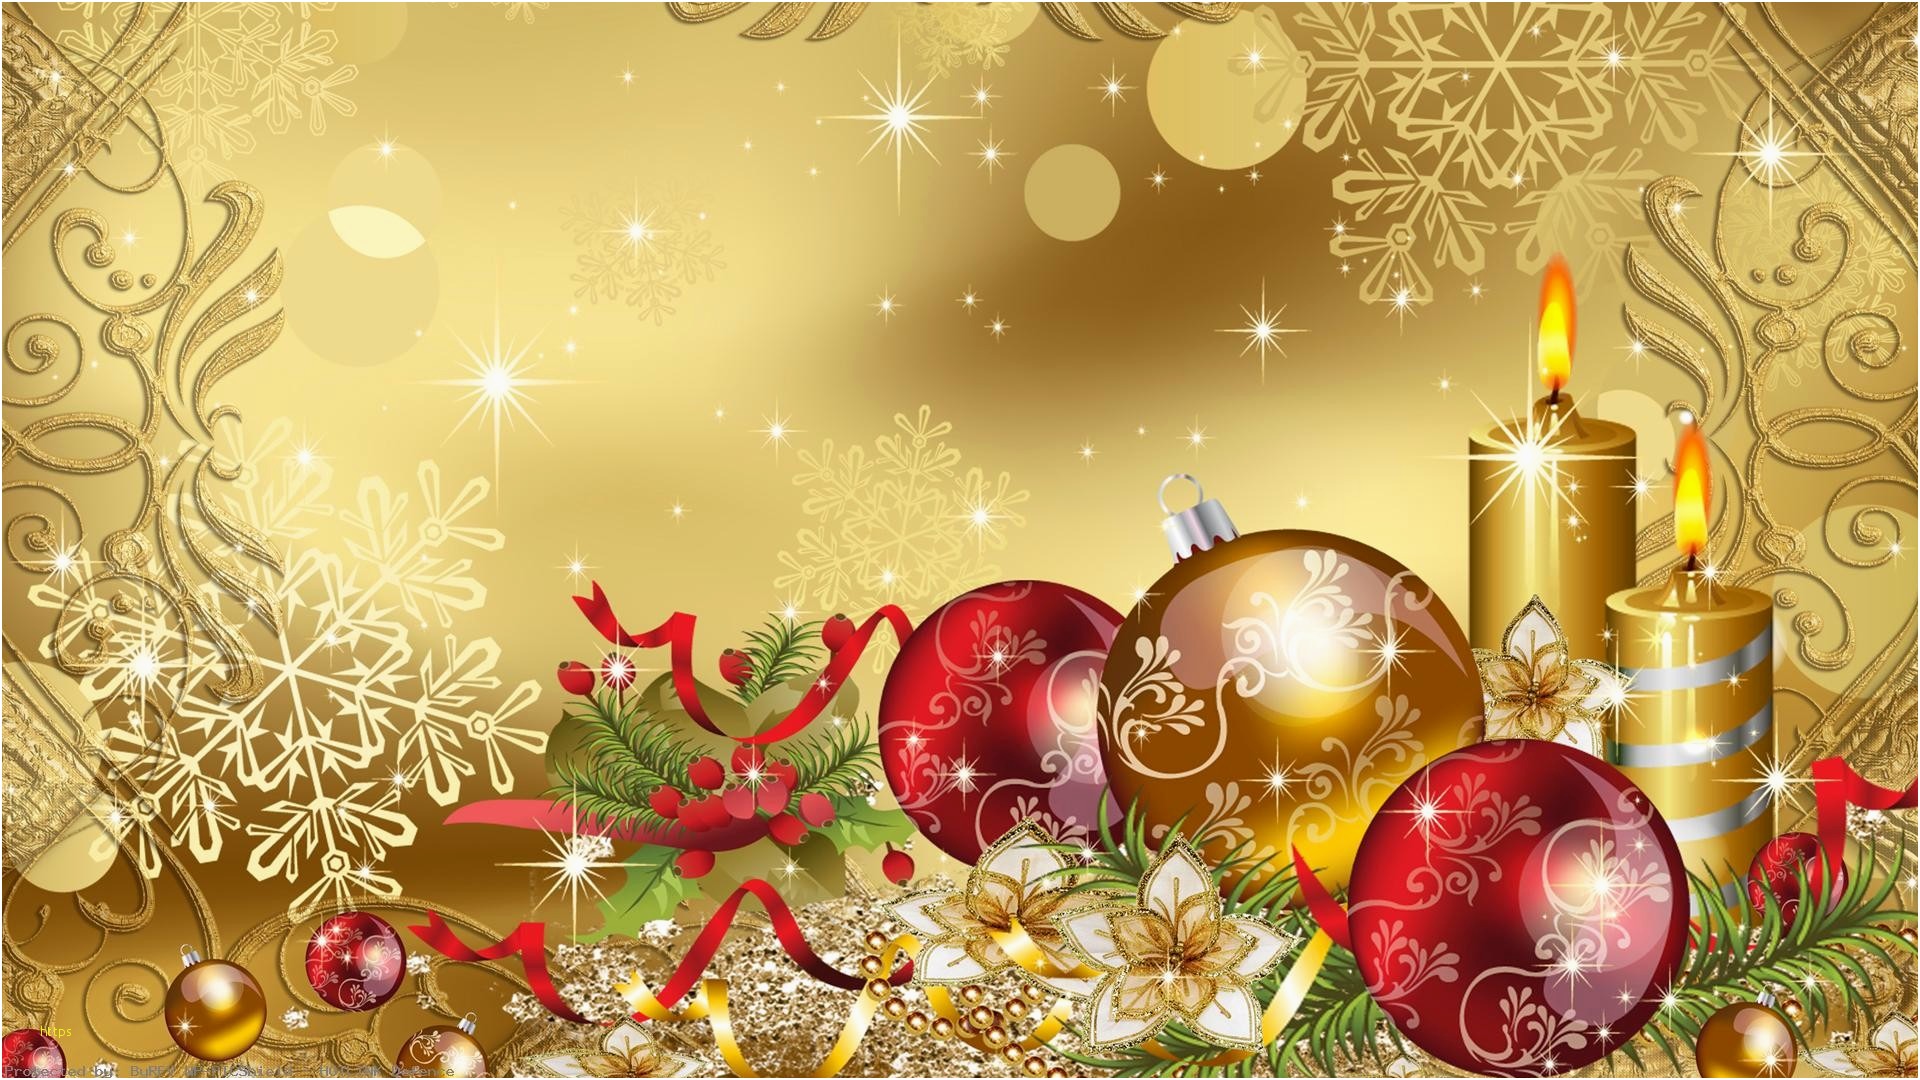 Christmas Wallpaper For Android Best Of